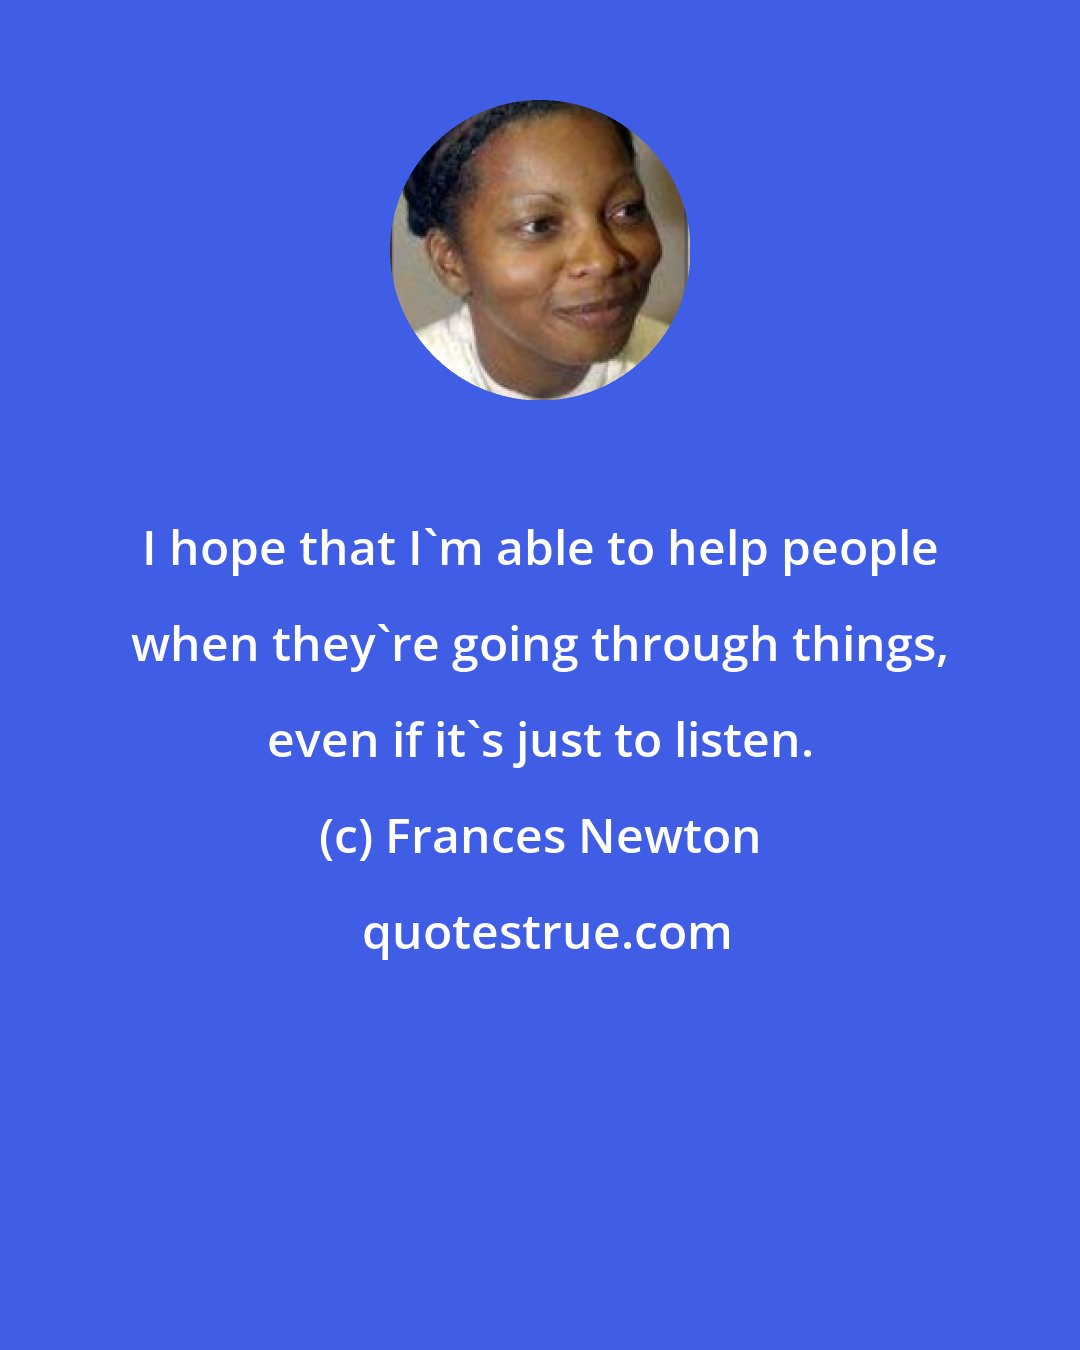 Frances Newton: I hope that I'm able to help people when they're going through things, even if it's just to listen.